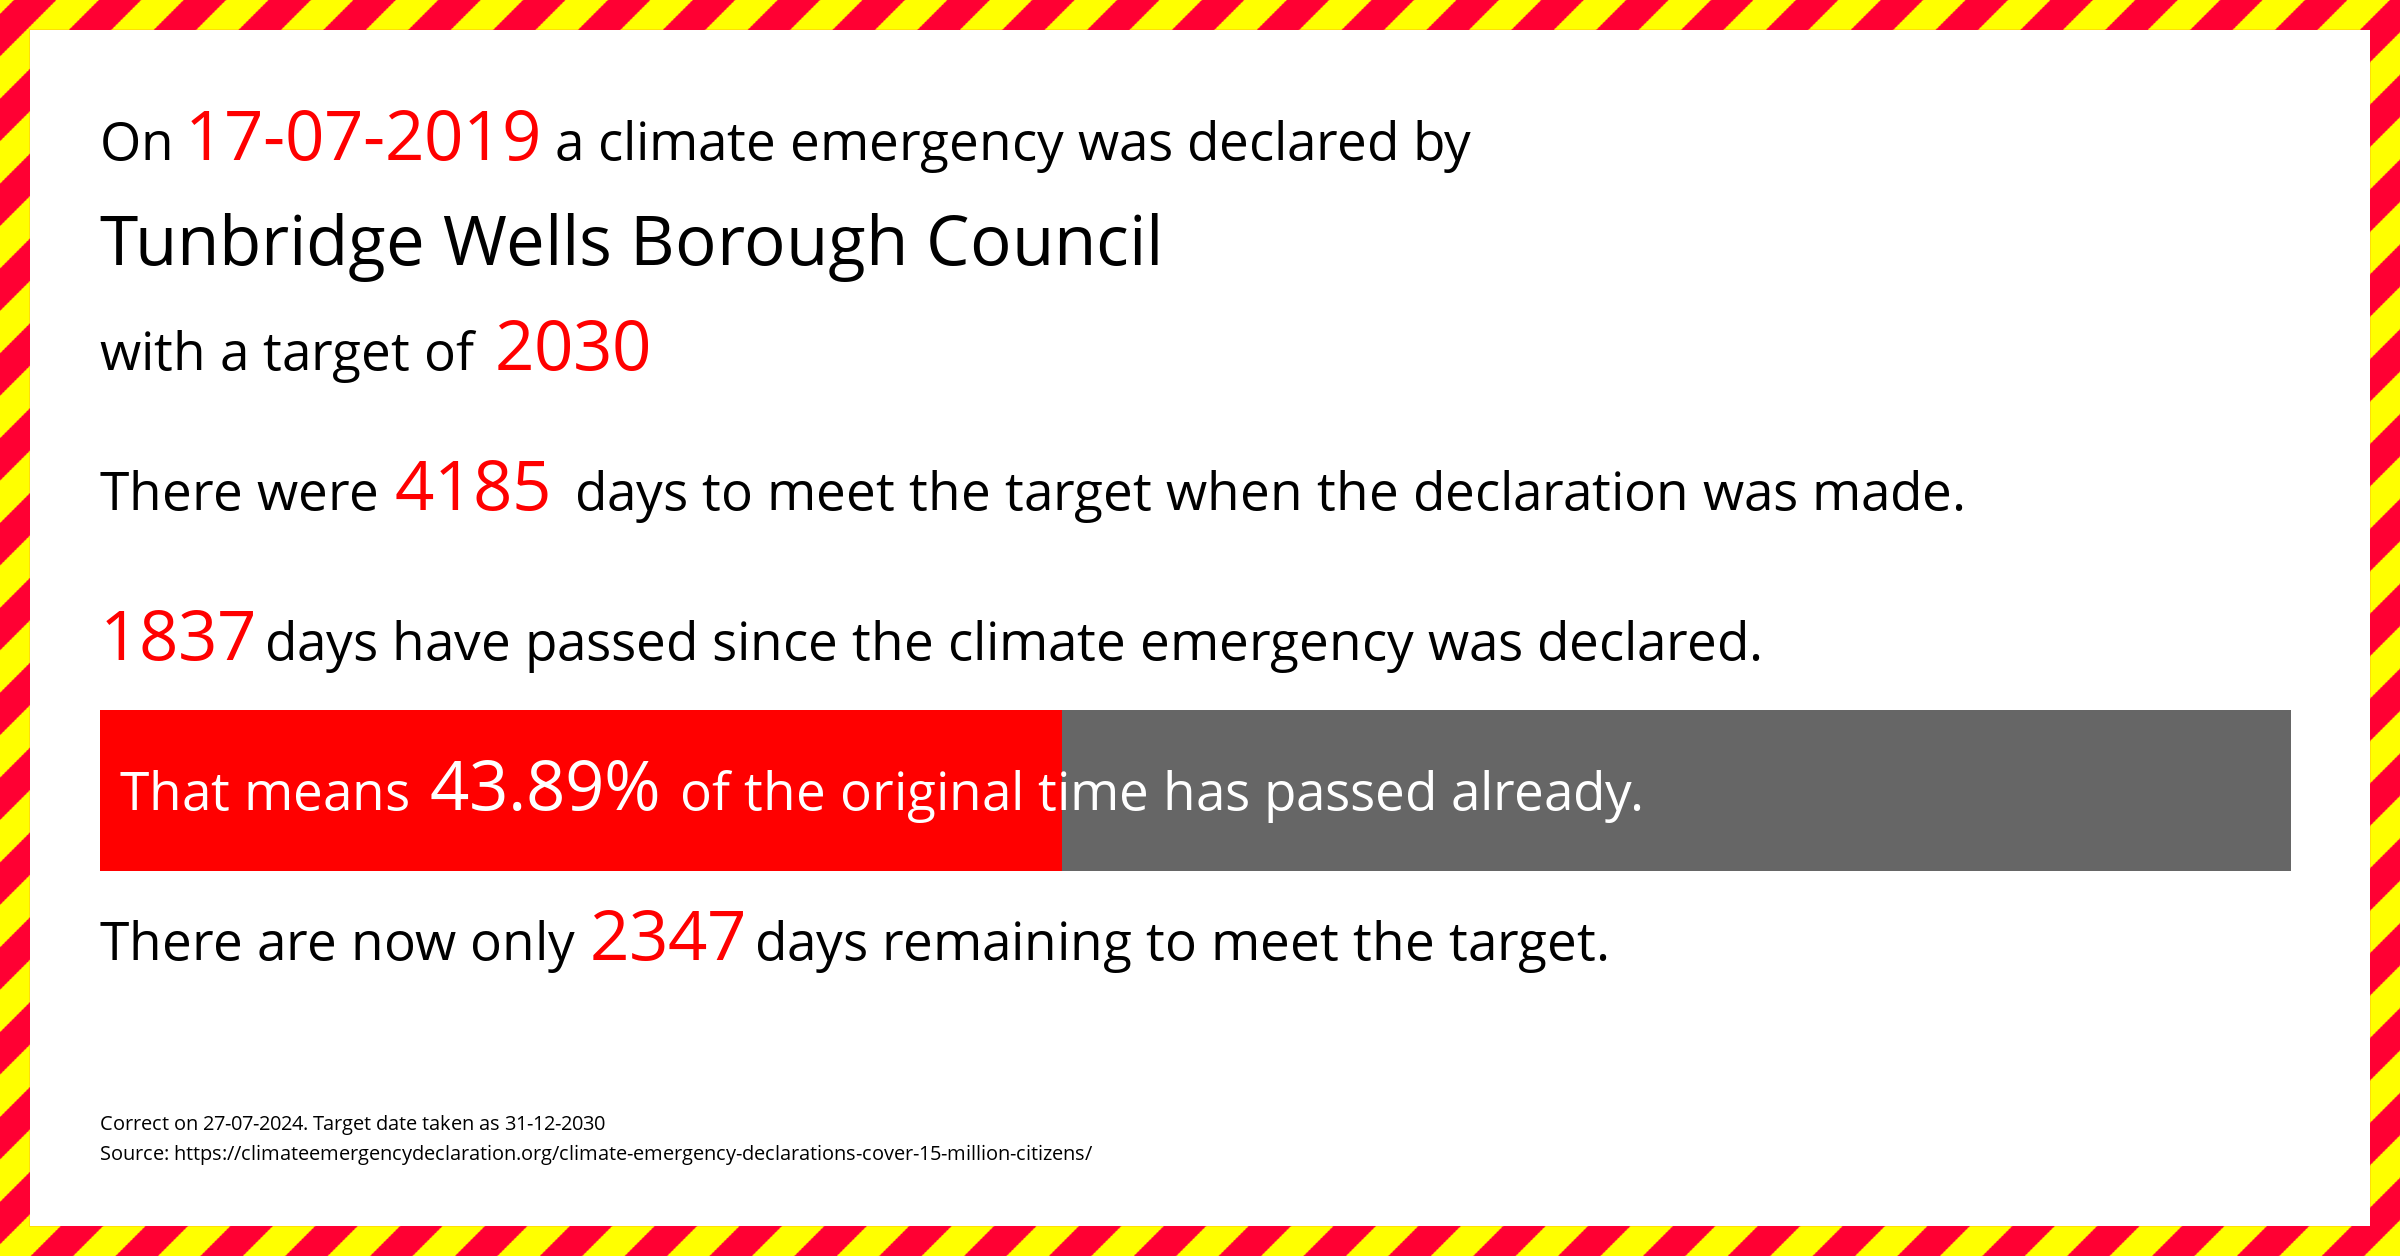 Tunbridge Wells Borough Council declared a Climate emergency on Wednesday 17th July 2019, with a target of 2030.